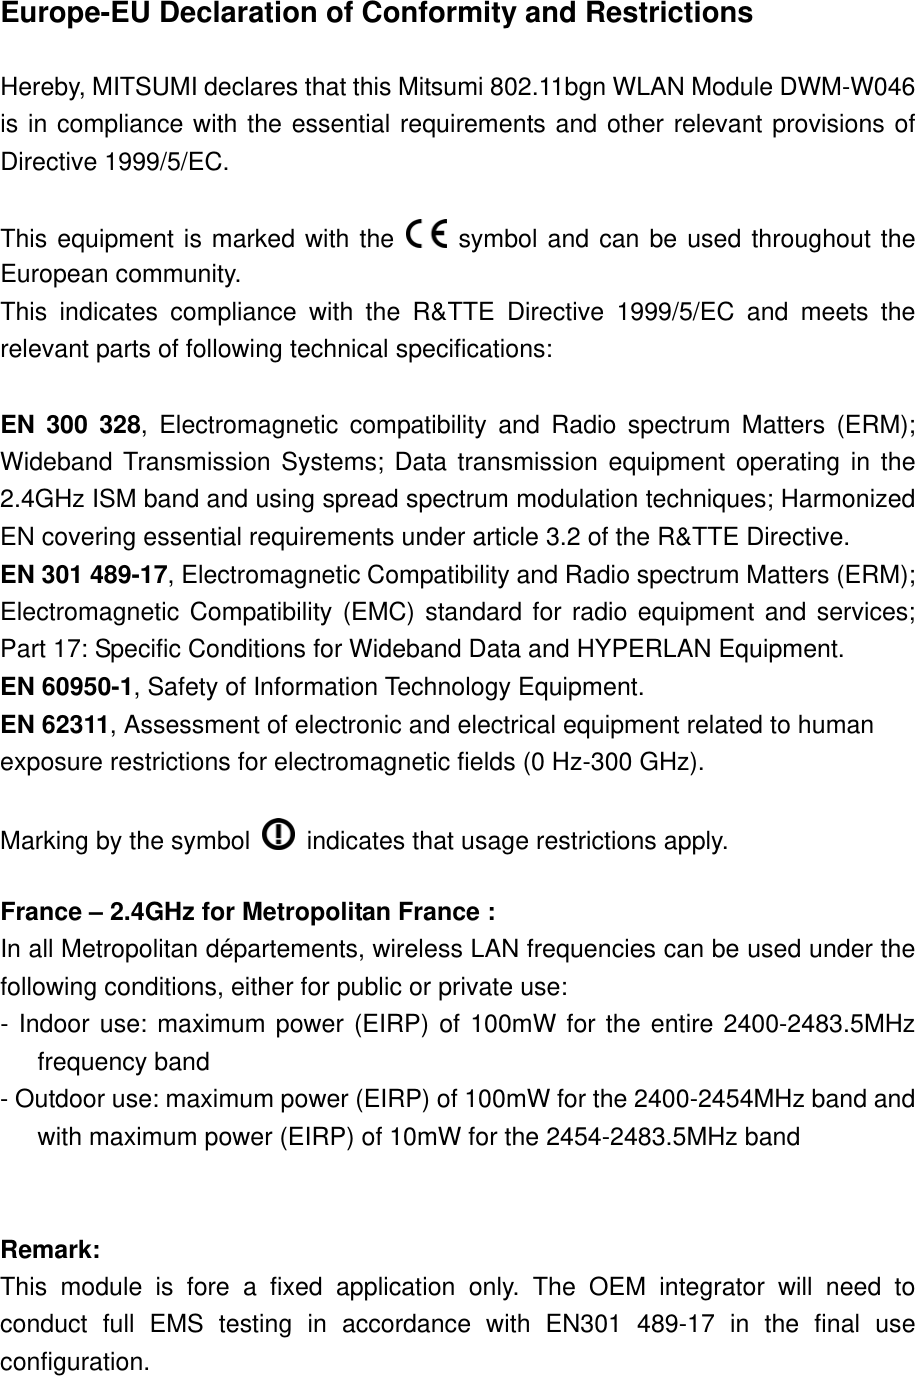 Europe-EU Declaration of Conformity and Restrictions  Hereby, MITSUMI declares that this Mitsumi 802.11bgn WLAN Module DWM-W046 is in compliance with the essential requirements and other relevant provisions of Directive 1999/5/EC.  This equipment is marked with the   symbol and can be used throughout the European community. This indicates compliance with the R&amp;TTE Directive 1999/5/EC and meets the relevant parts of following technical specifications:  EN 300 328, Electromagnetic compatibility and Radio spectrum Matters (ERM); Wideband Transmission Systems; Data transmission equipment operating in the 2.4GHz ISM band and using spread spectrum modulation techniques; Harmonized EN covering essential requirements under article 3.2 of the R&amp;TTE Directive. EN 301 489-17, Electromagnetic Compatibility and Radio spectrum Matters (ERM); Electromagnetic Compatibility (EMC) standard for radio equipment and services; Part 17: Specific Conditions for Wideband Data and HYPERLAN Equipment. EN 60950-1, Safety of Information Technology Equipment. EN 62311, Assessment of electronic and electrical equipment related to human exposure restrictions for electromagnetic fields (0 Hz-300 GHz).  Marking by the symbol    indicates that usage restrictions apply.  France – 2.4GHz for Metropolitan France : In all Metropolitan départements, wireless LAN frequencies can be used under the following conditions, either for public or private use: - Indoor use: maximum power (EIRP) of 100mW for the entire 2400-2483.5MHz frequency band - Outdoor use: maximum power (EIRP) of 100mW for the 2400-2454MHz band and with maximum power (EIRP) of 10mW for the 2454-2483.5MHz band   Remark:  This module is fore a fixed application only. The OEM integrator will need to conduct full EMS testing in accordance with EN301 489-17 in the final use configuration.   